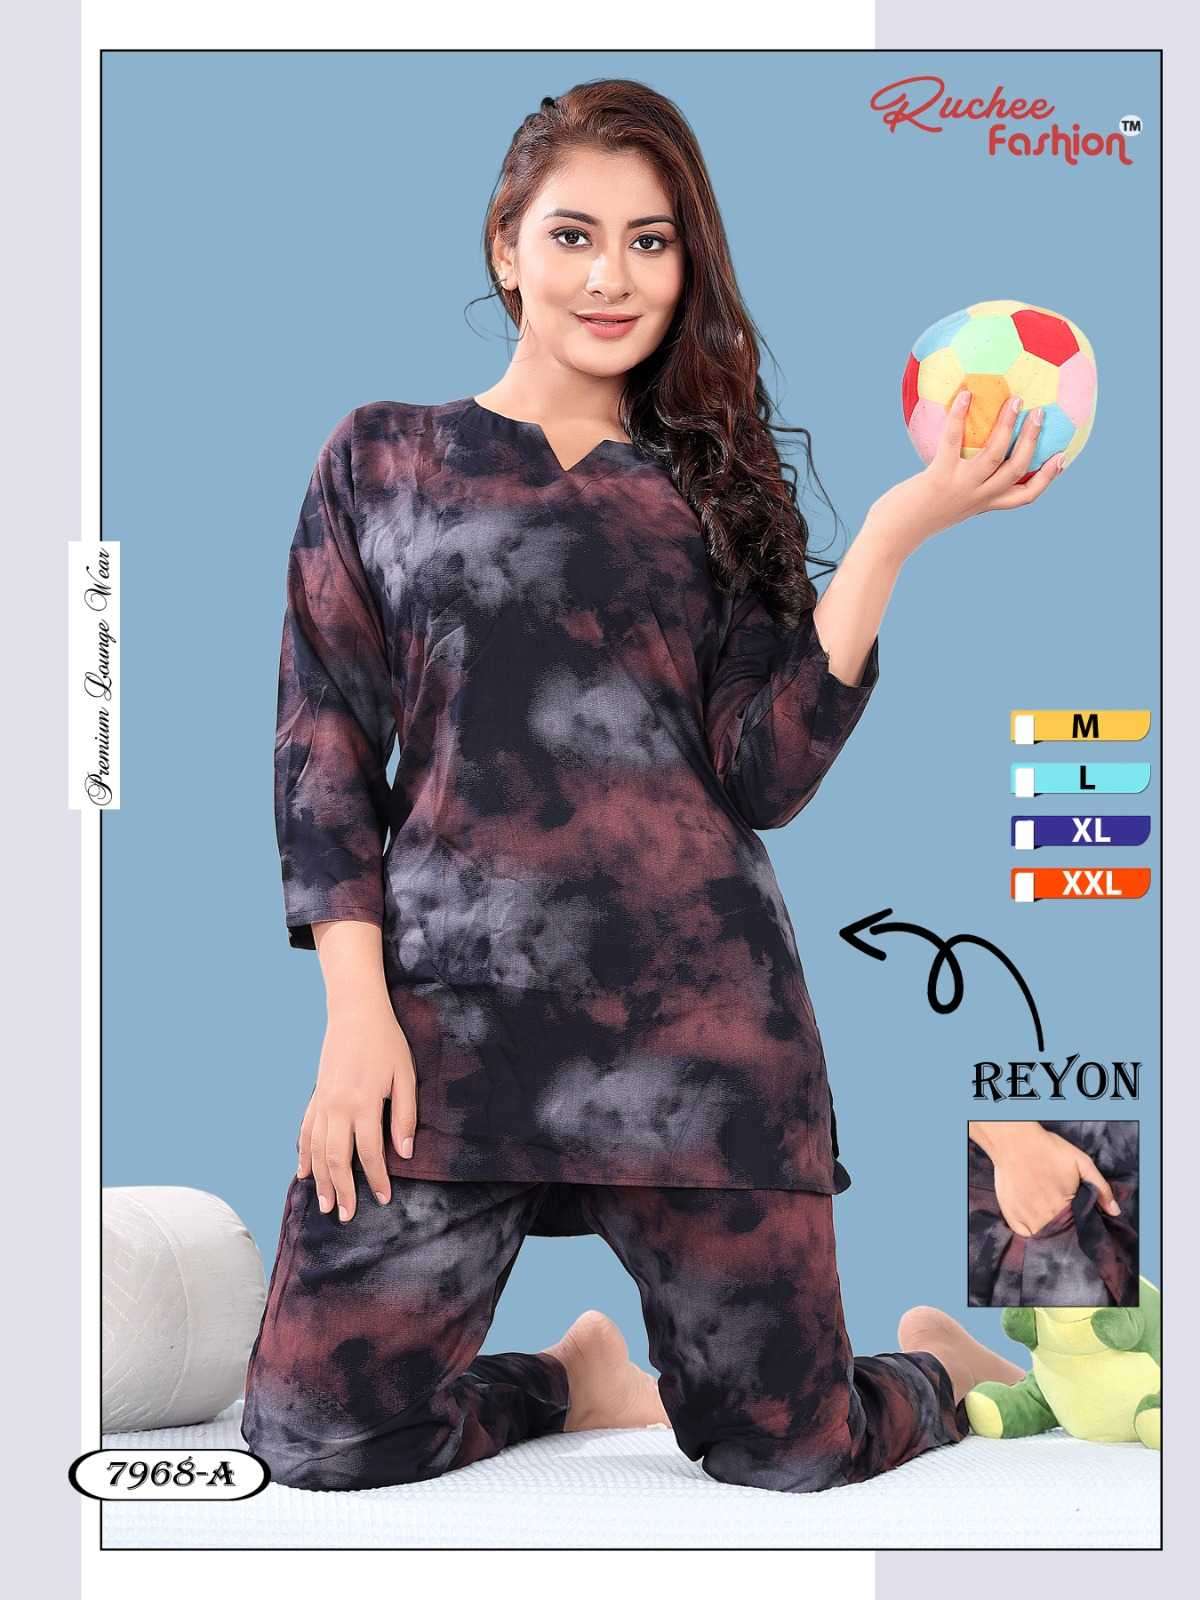 Premium Fabric Mayraa Brand ✓ MOST SELLING ✓ COTTON HOSIERY MATERIAL BEST  QUALITY ✓ Full Nigh… | Night suit for women, Night dress for women, Night  wear dress